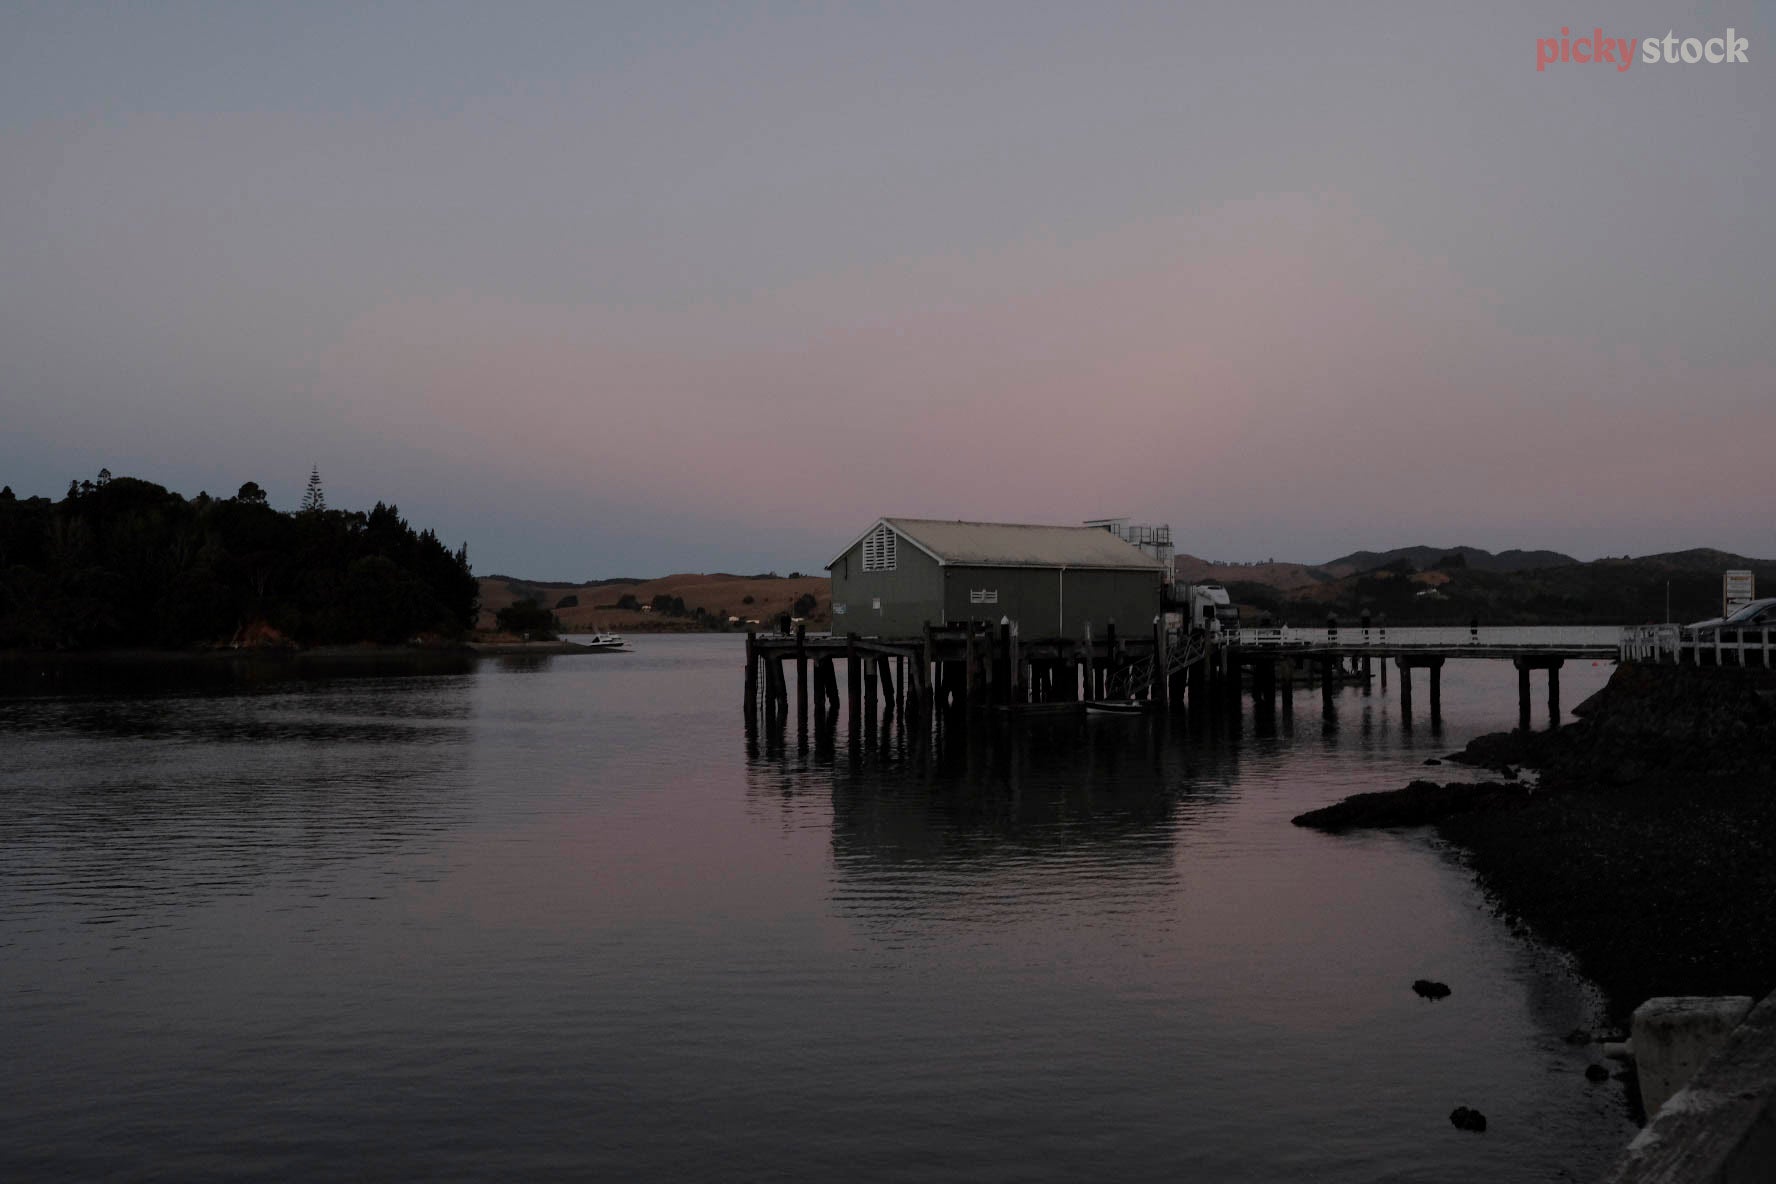 An old boating shed sits on a wharf, as the sun sets. The surrounding is still, misty and paint-like. Beautiful light pink reflections of the sky are reflected in the water. 